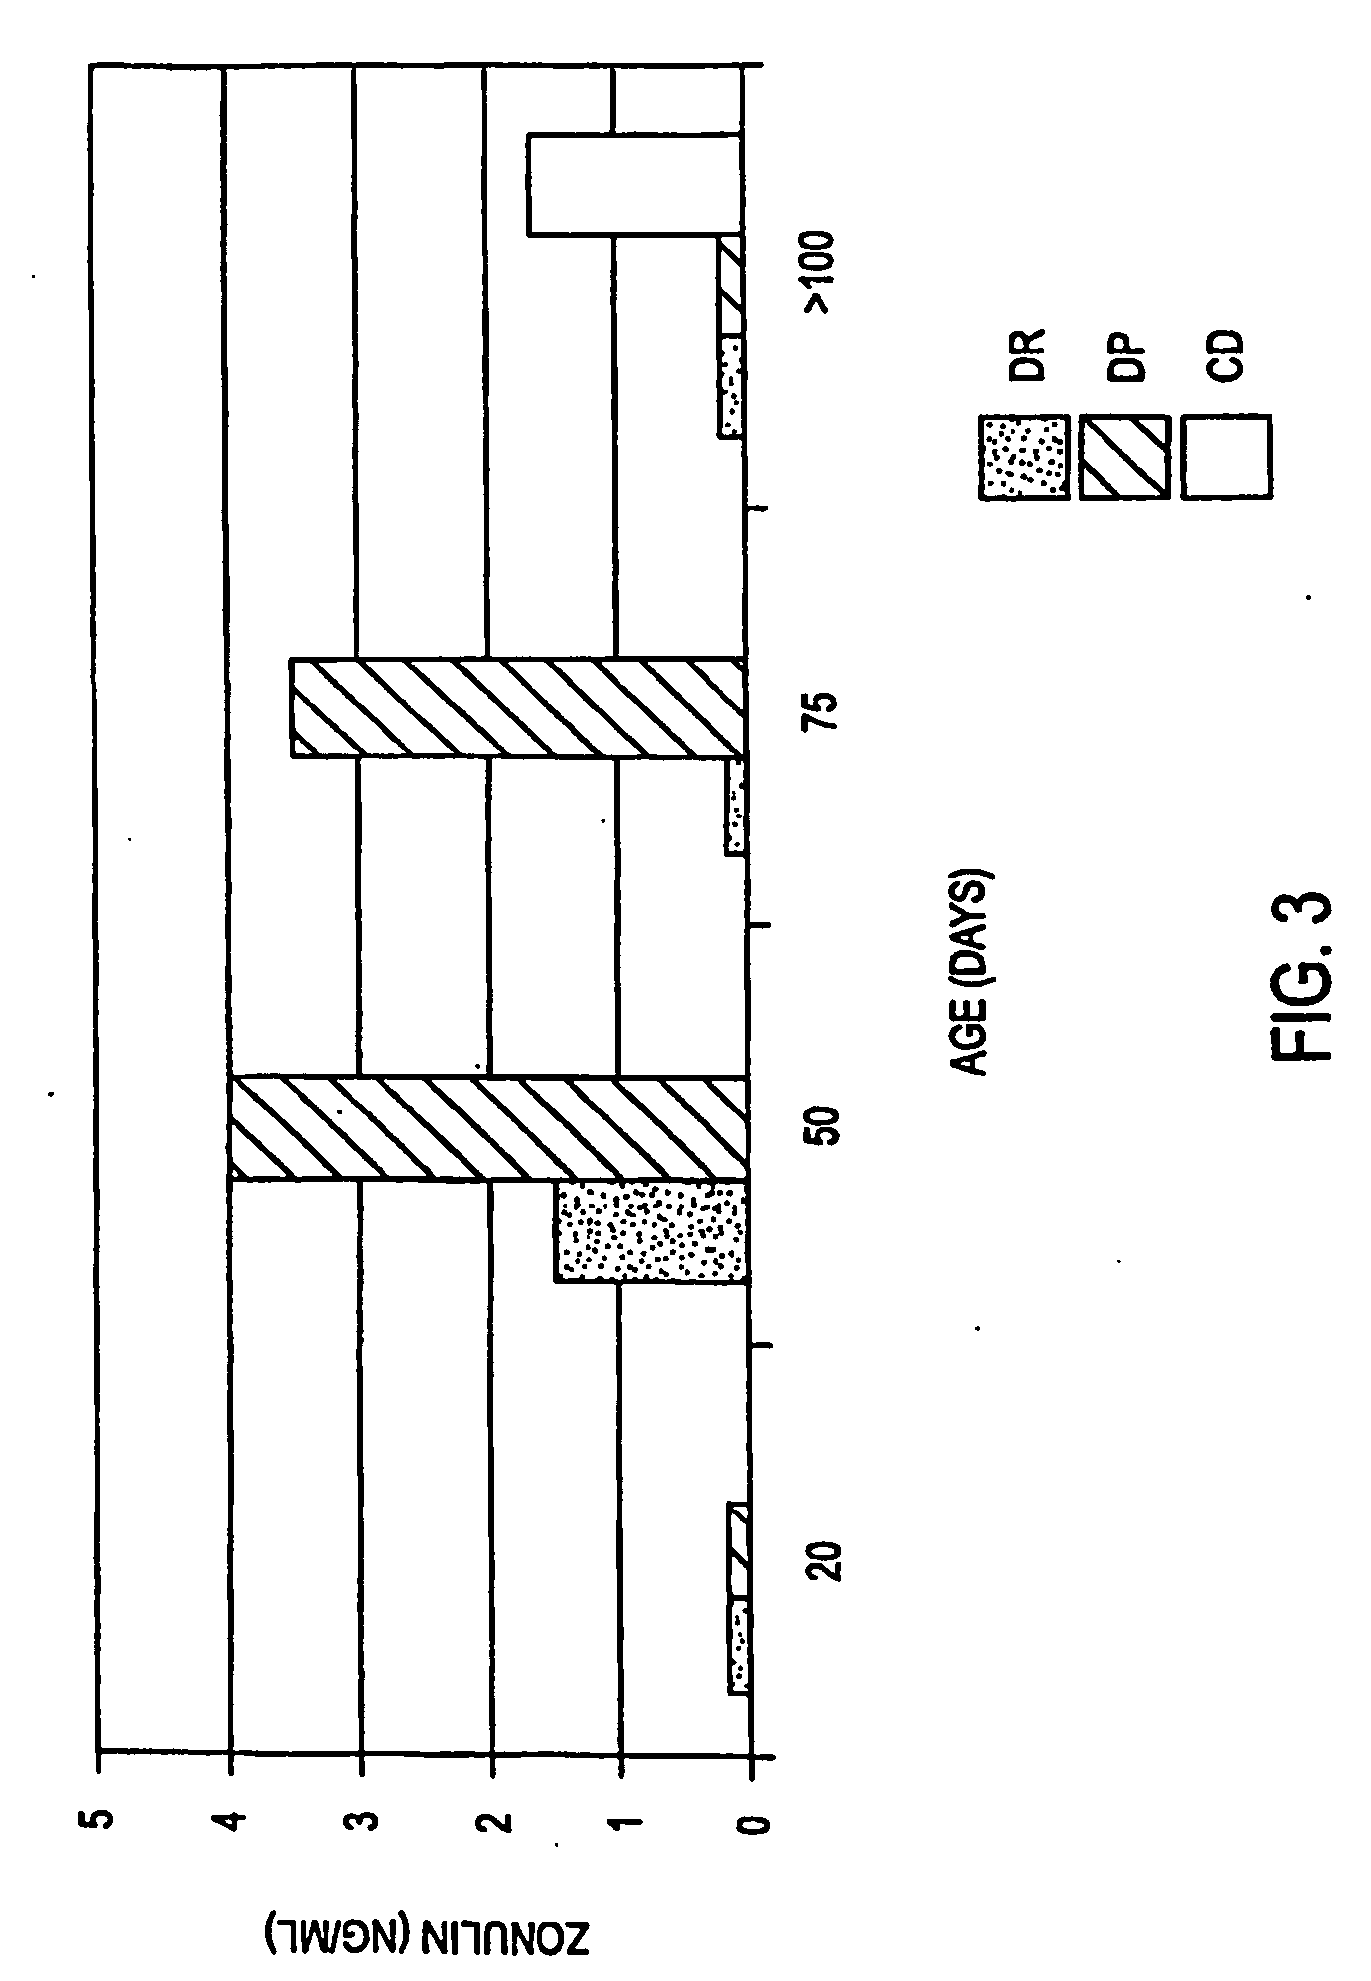 Method of use of antagonists of zonulin to prevent the loss of or to regenerate pancreatic cells